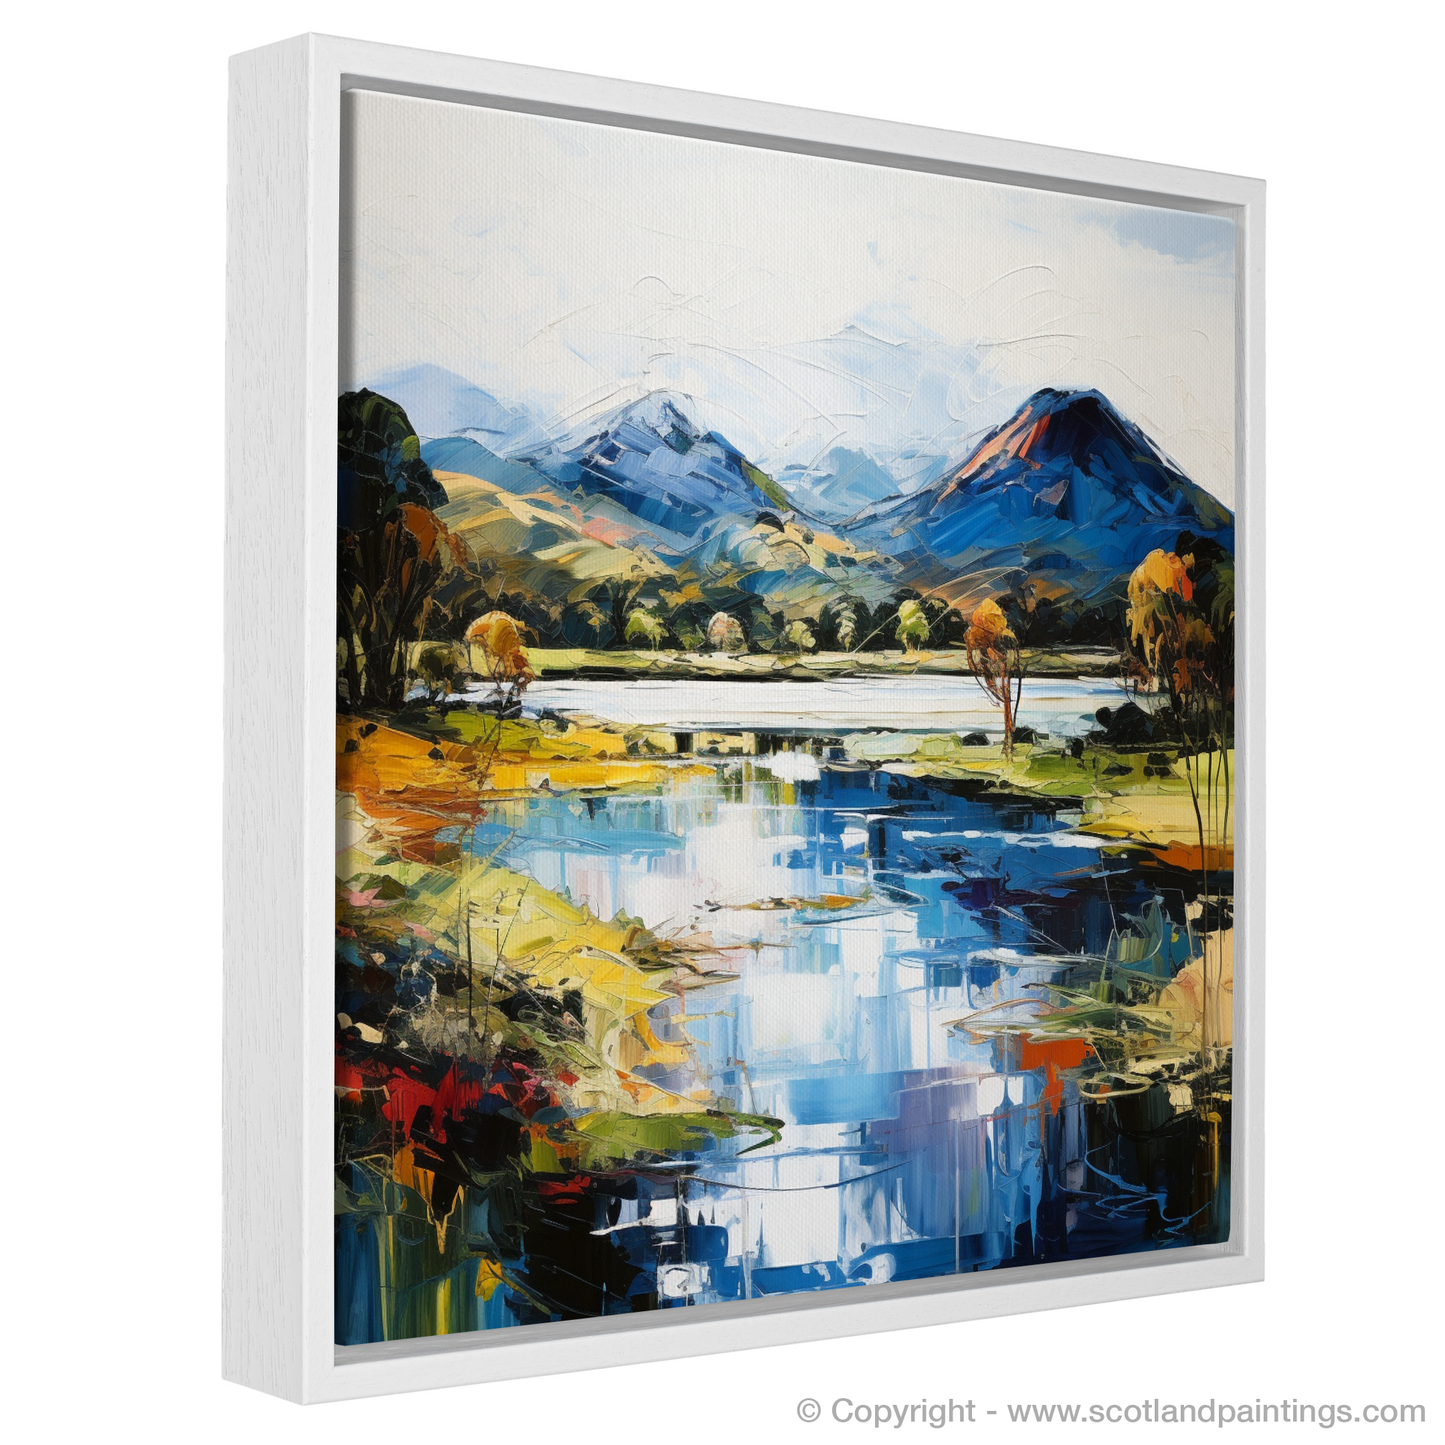 Painting and Art Print of Loch Ard, Stirling entitled "Expressionist Enchantment of Loch Ard".